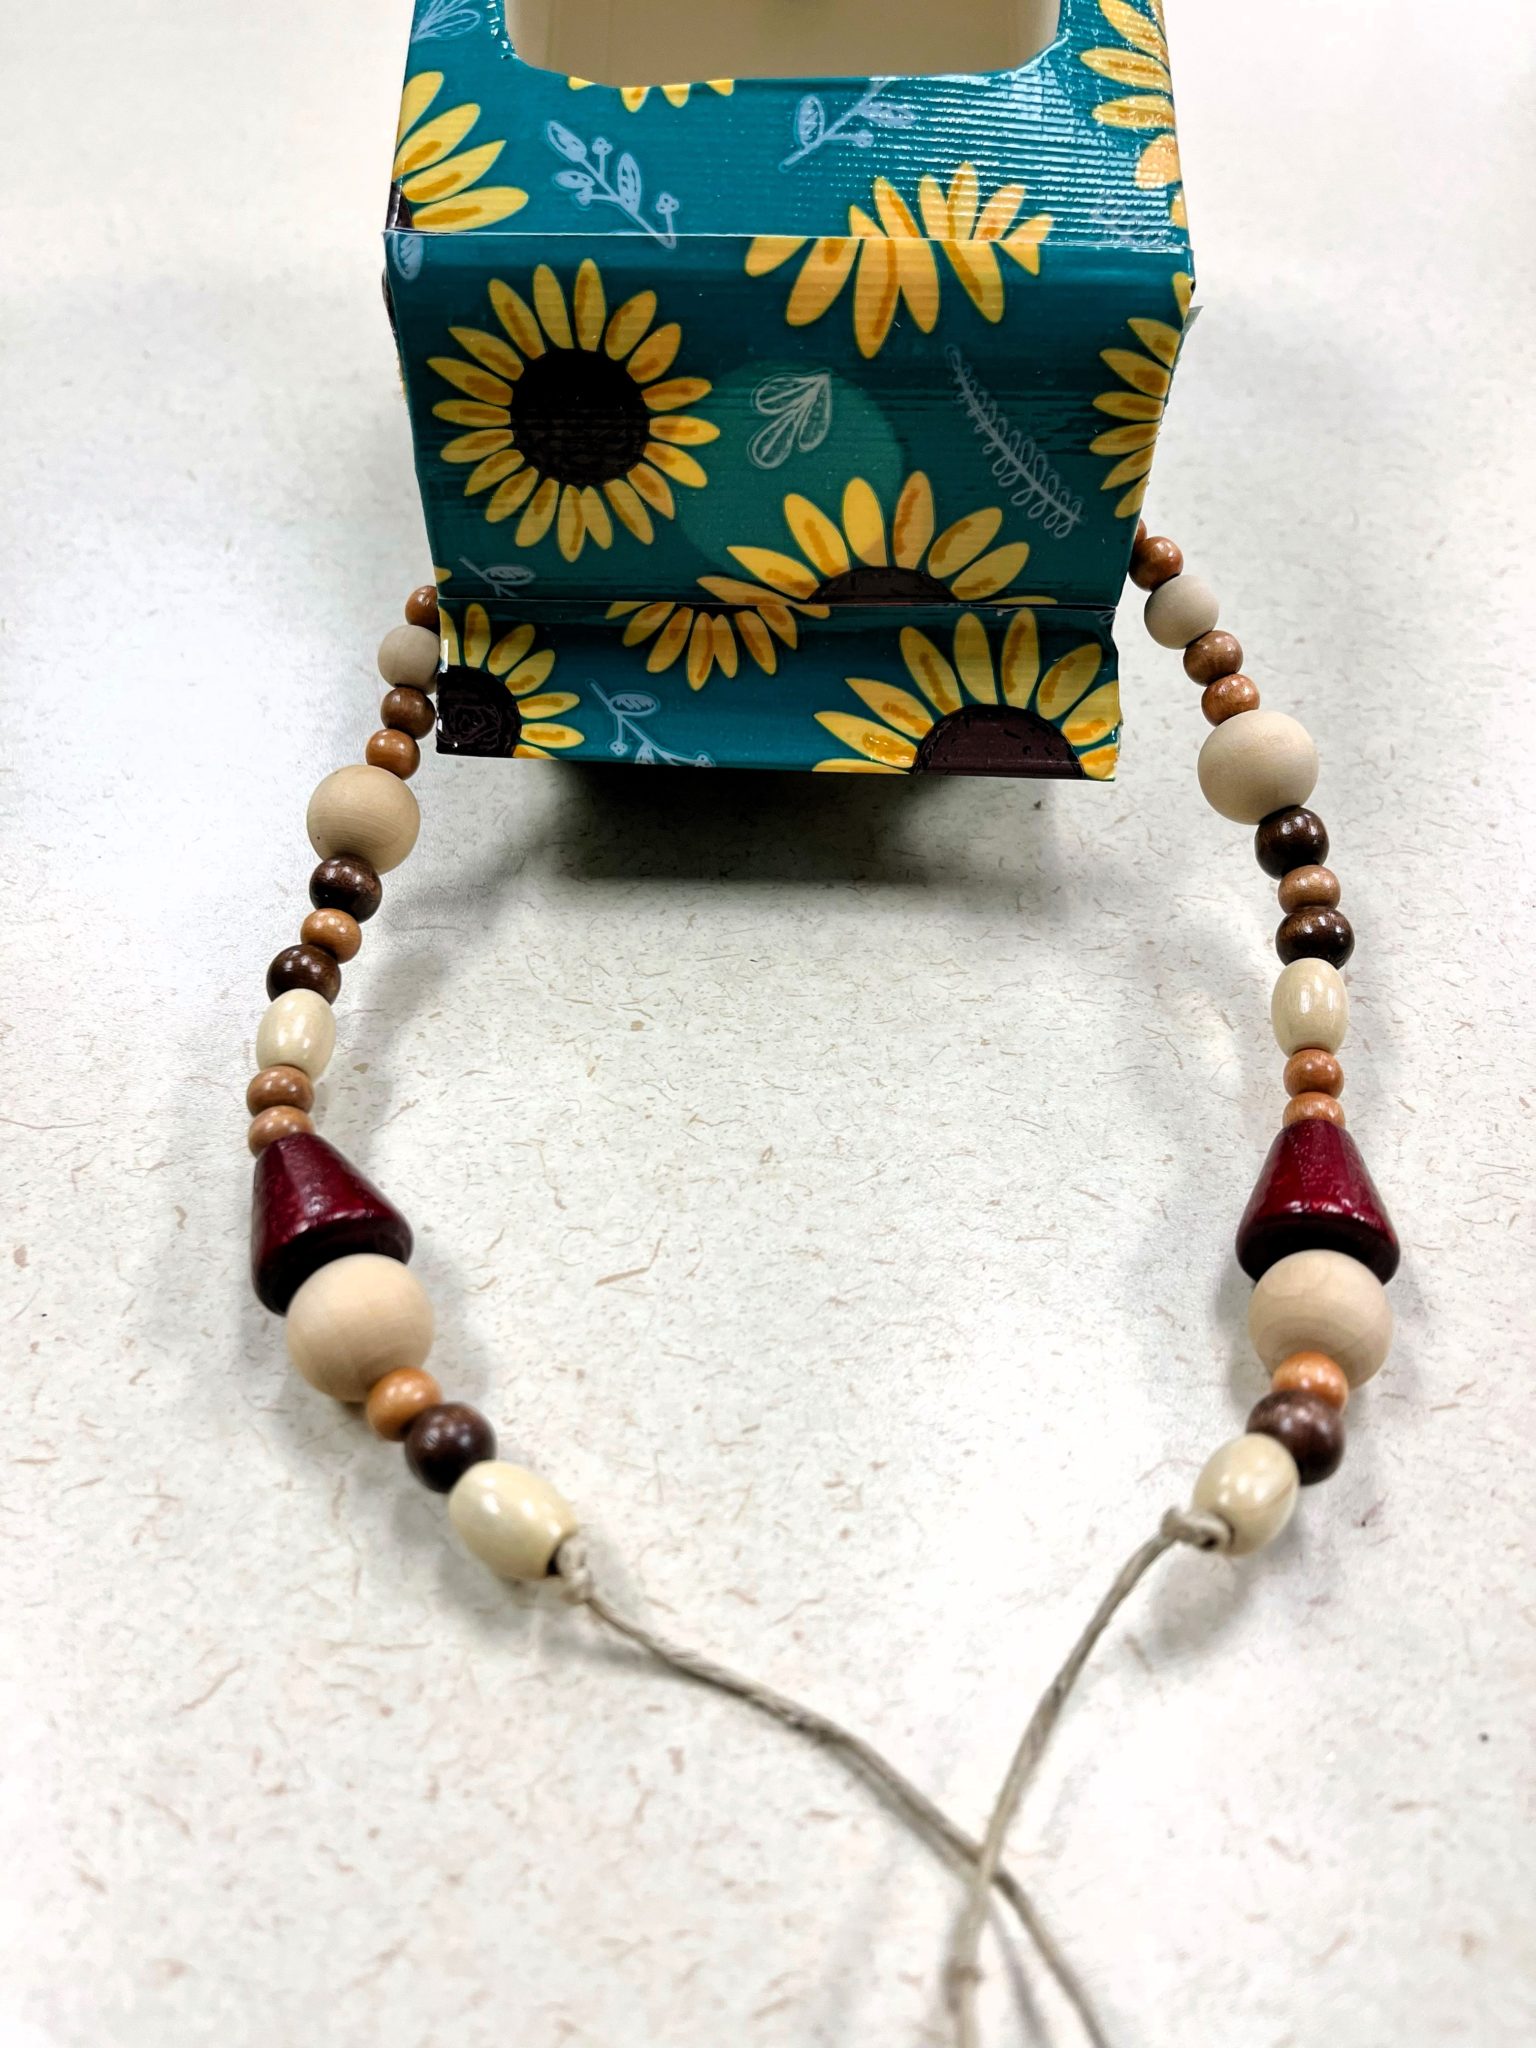 Bird feeder with string of beads added to hang